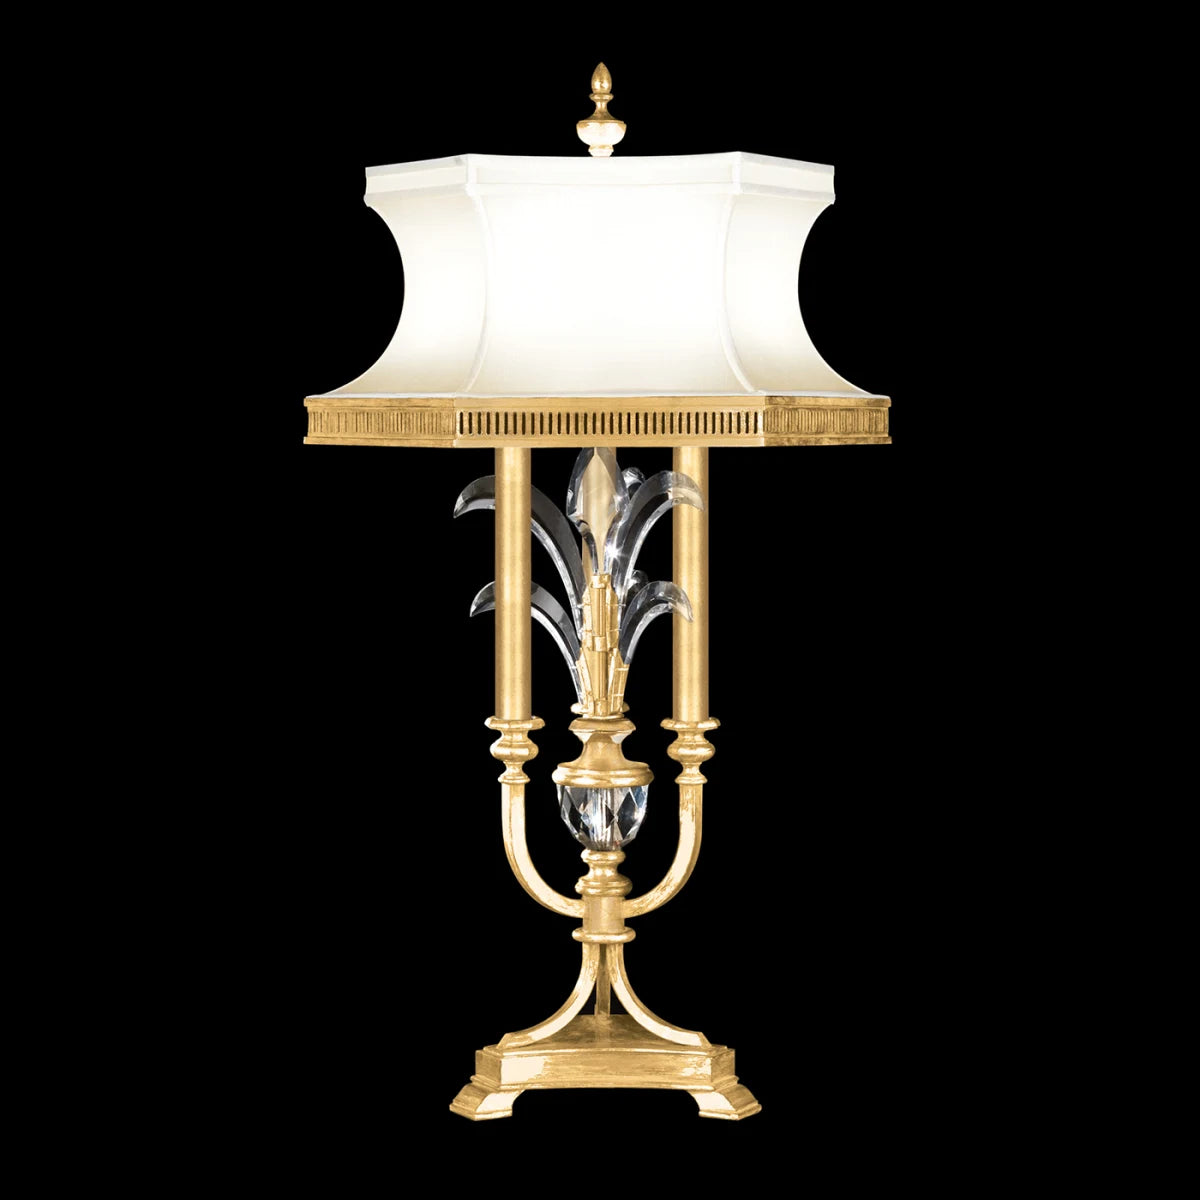 Beveled Arcs 37" Table Lamp with Matching Candlesticks